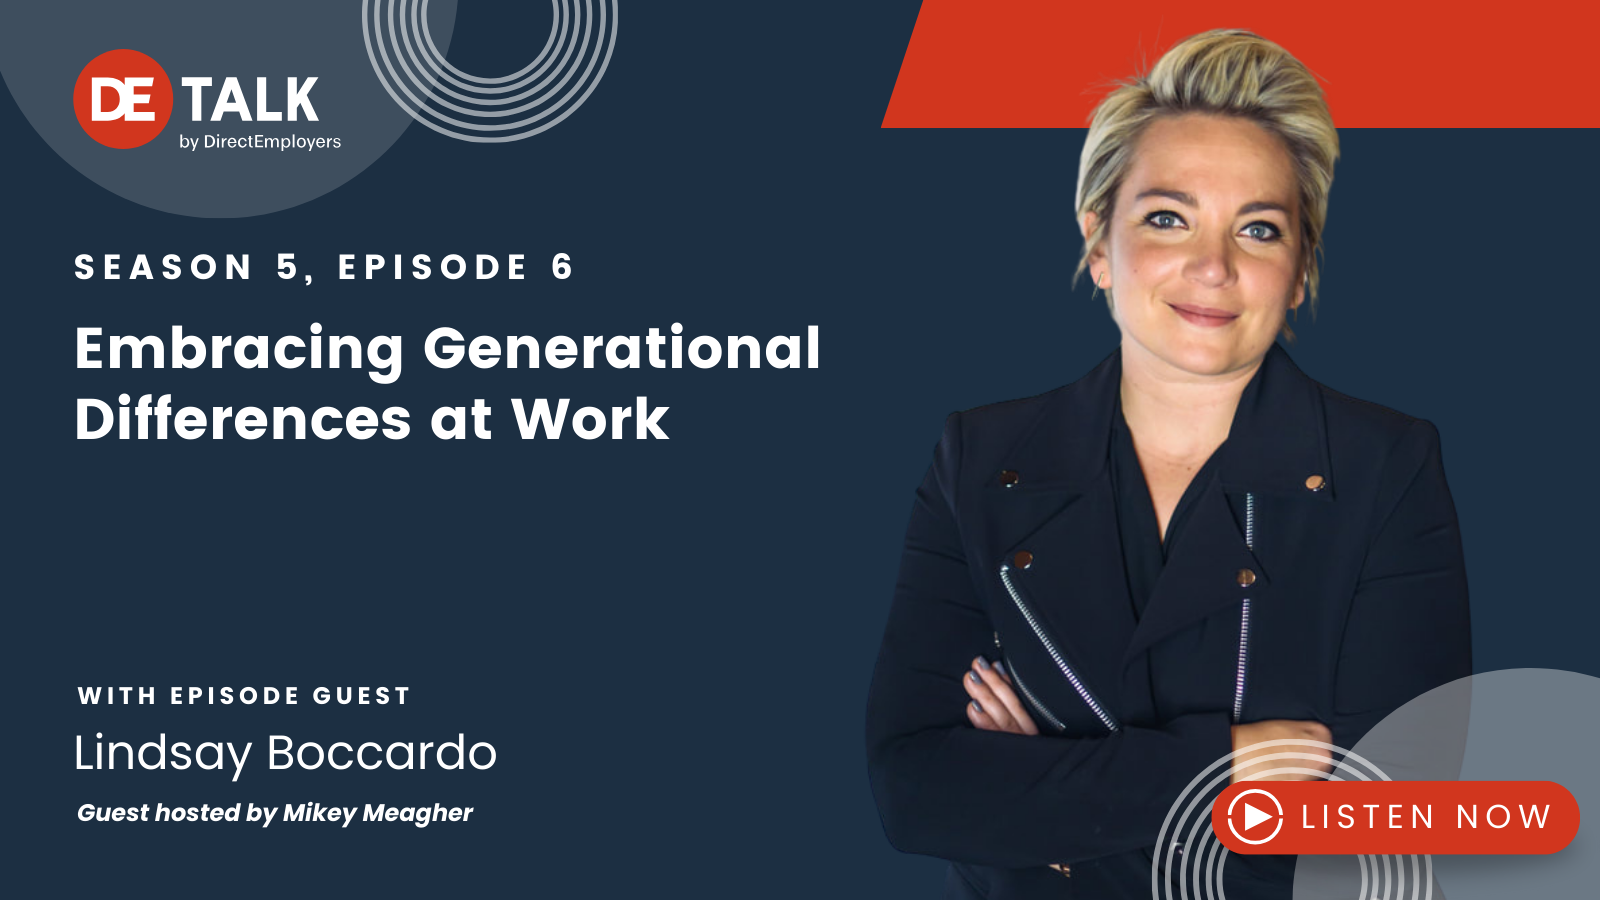 DE Talk S5E6 Embracing Generational Differences at Work with Lindsay Boccardo